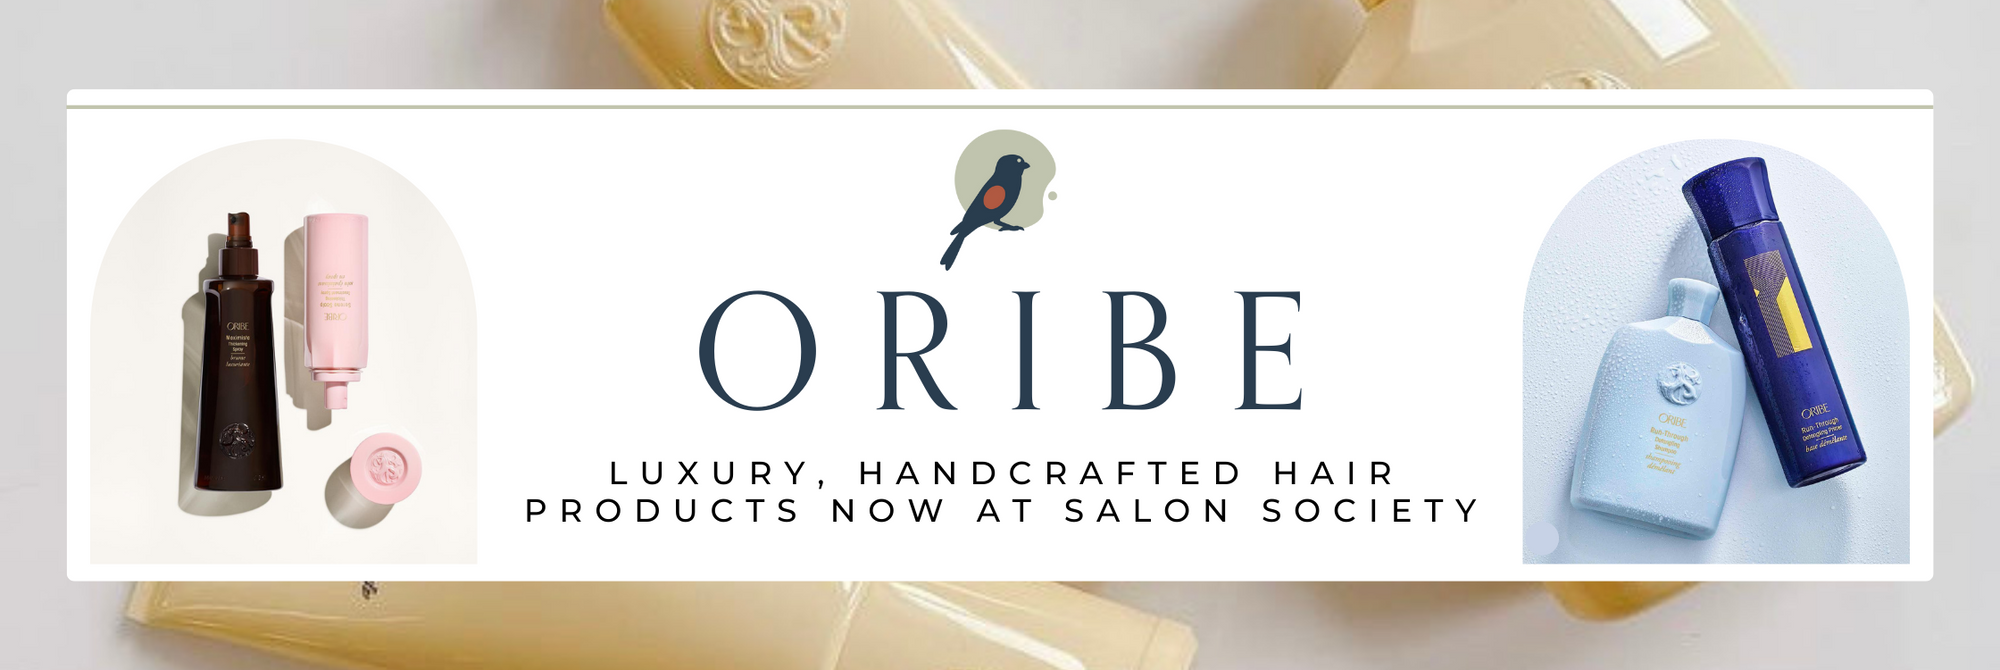 Salon Society Oribe banner. Oribe Handcrafted Luxury hair products now available at Salon Society Regina.